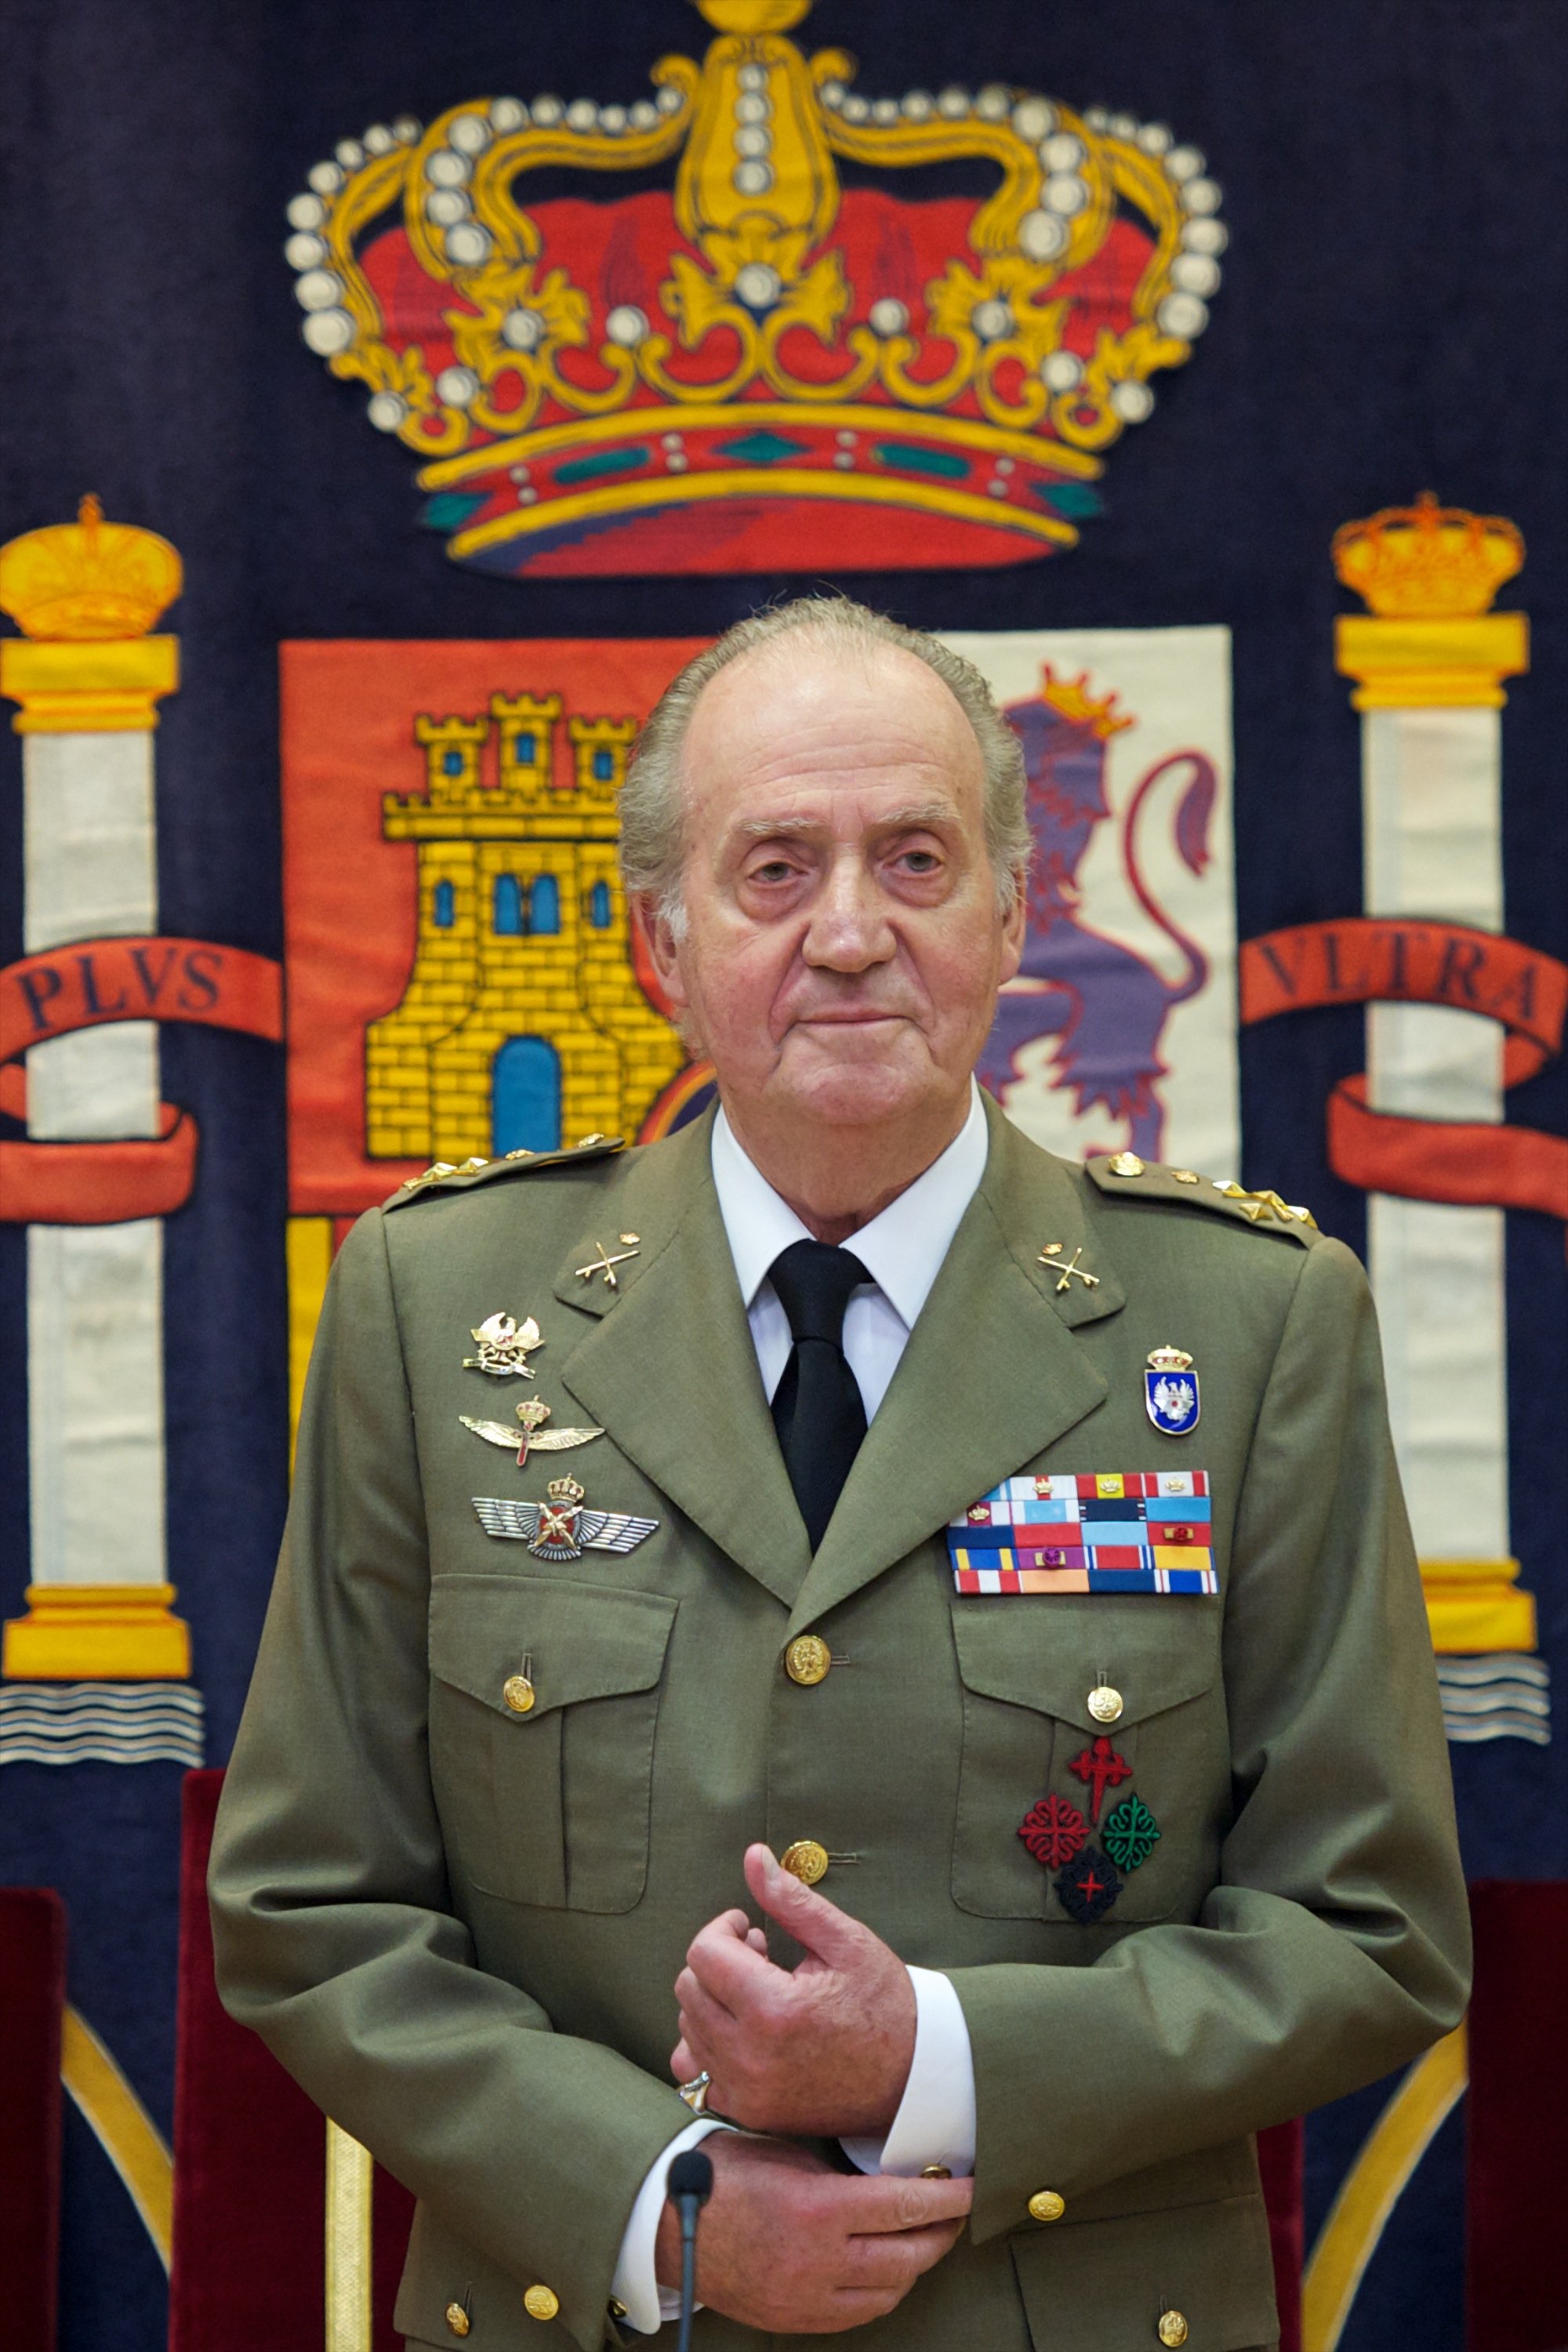 King Juan Carlos of Spain attending the closure of "The General Staff of the Spanish Army" Academic Year on June 29, 2012 in Madrid, Spain. / Source: Getty Images